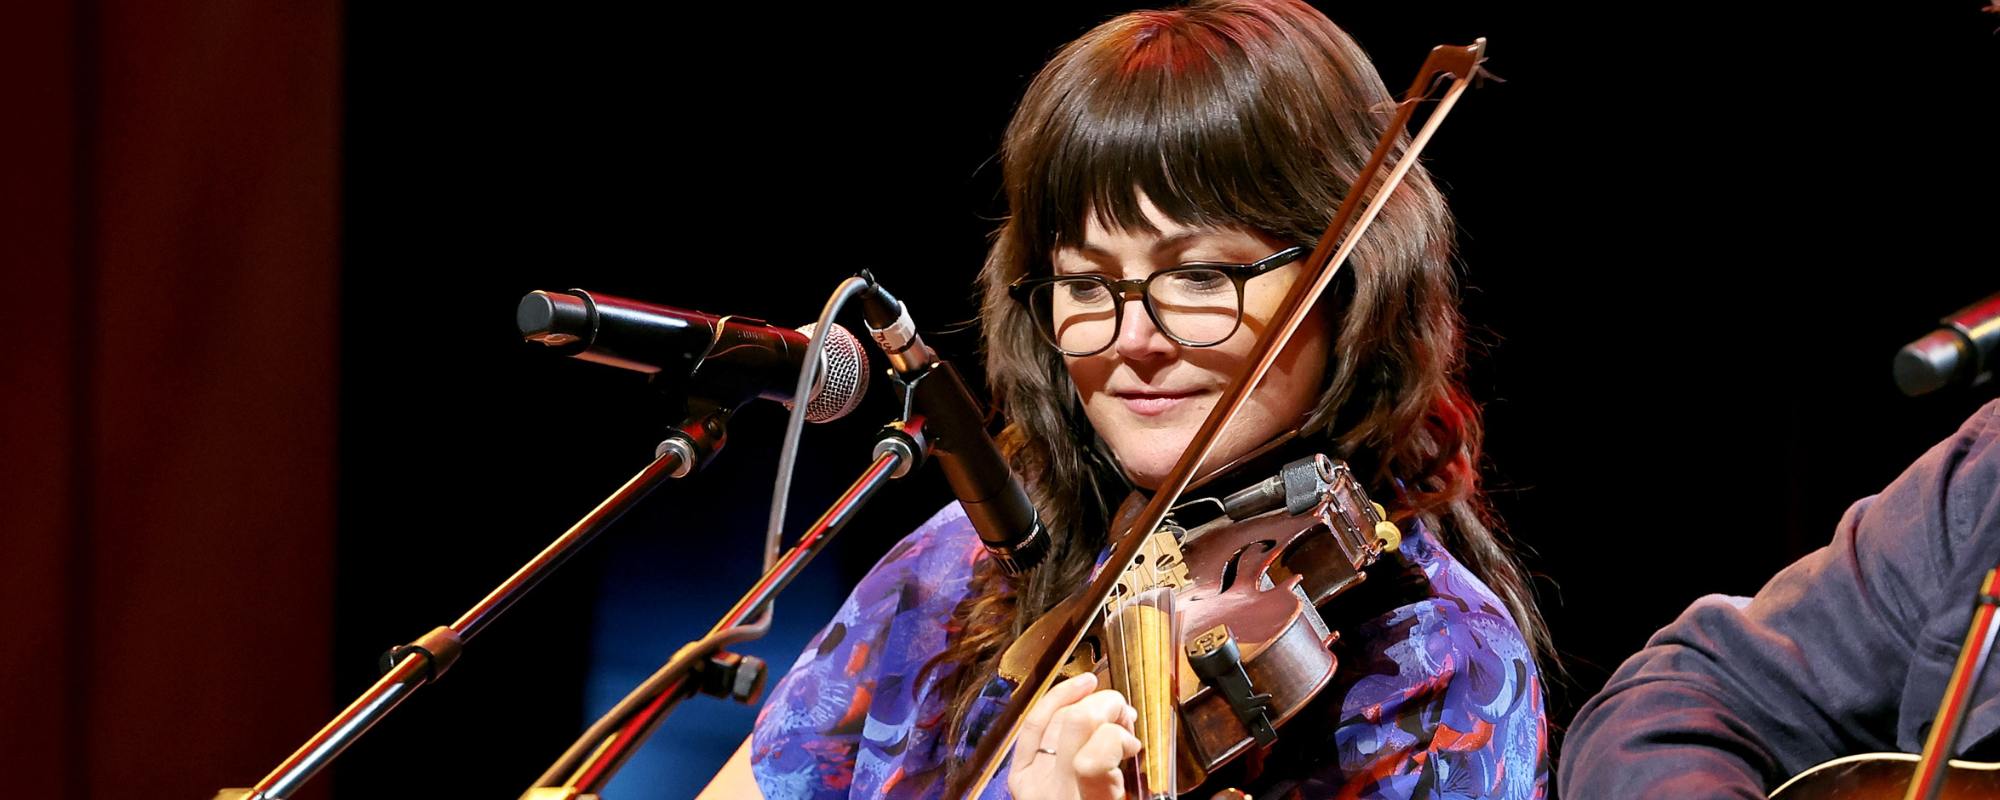 5 Female Fiddle Players Breaking Barriers